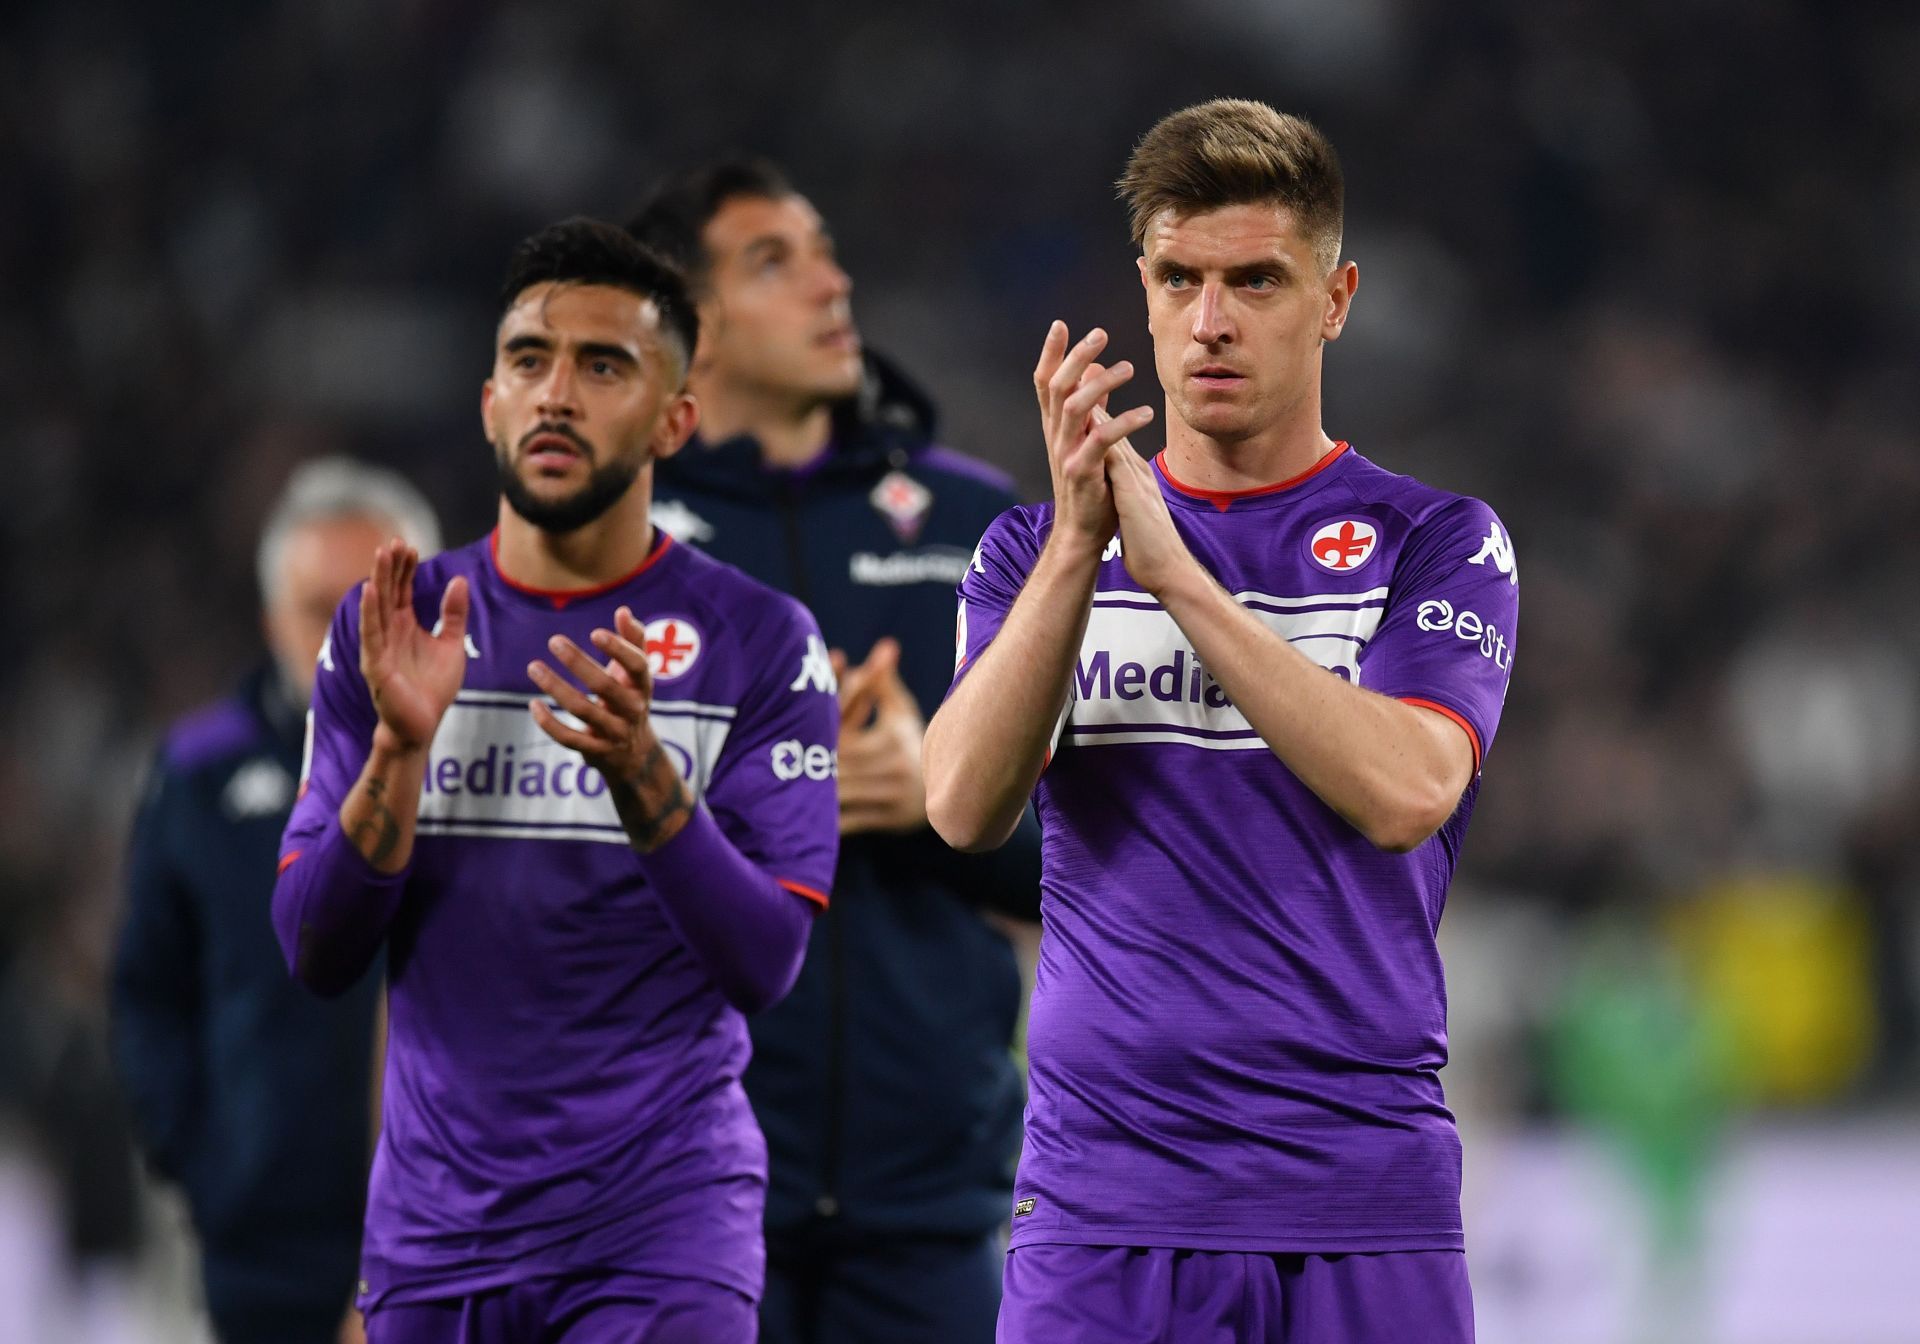 Fiorentina will be looking to bounce back with a win